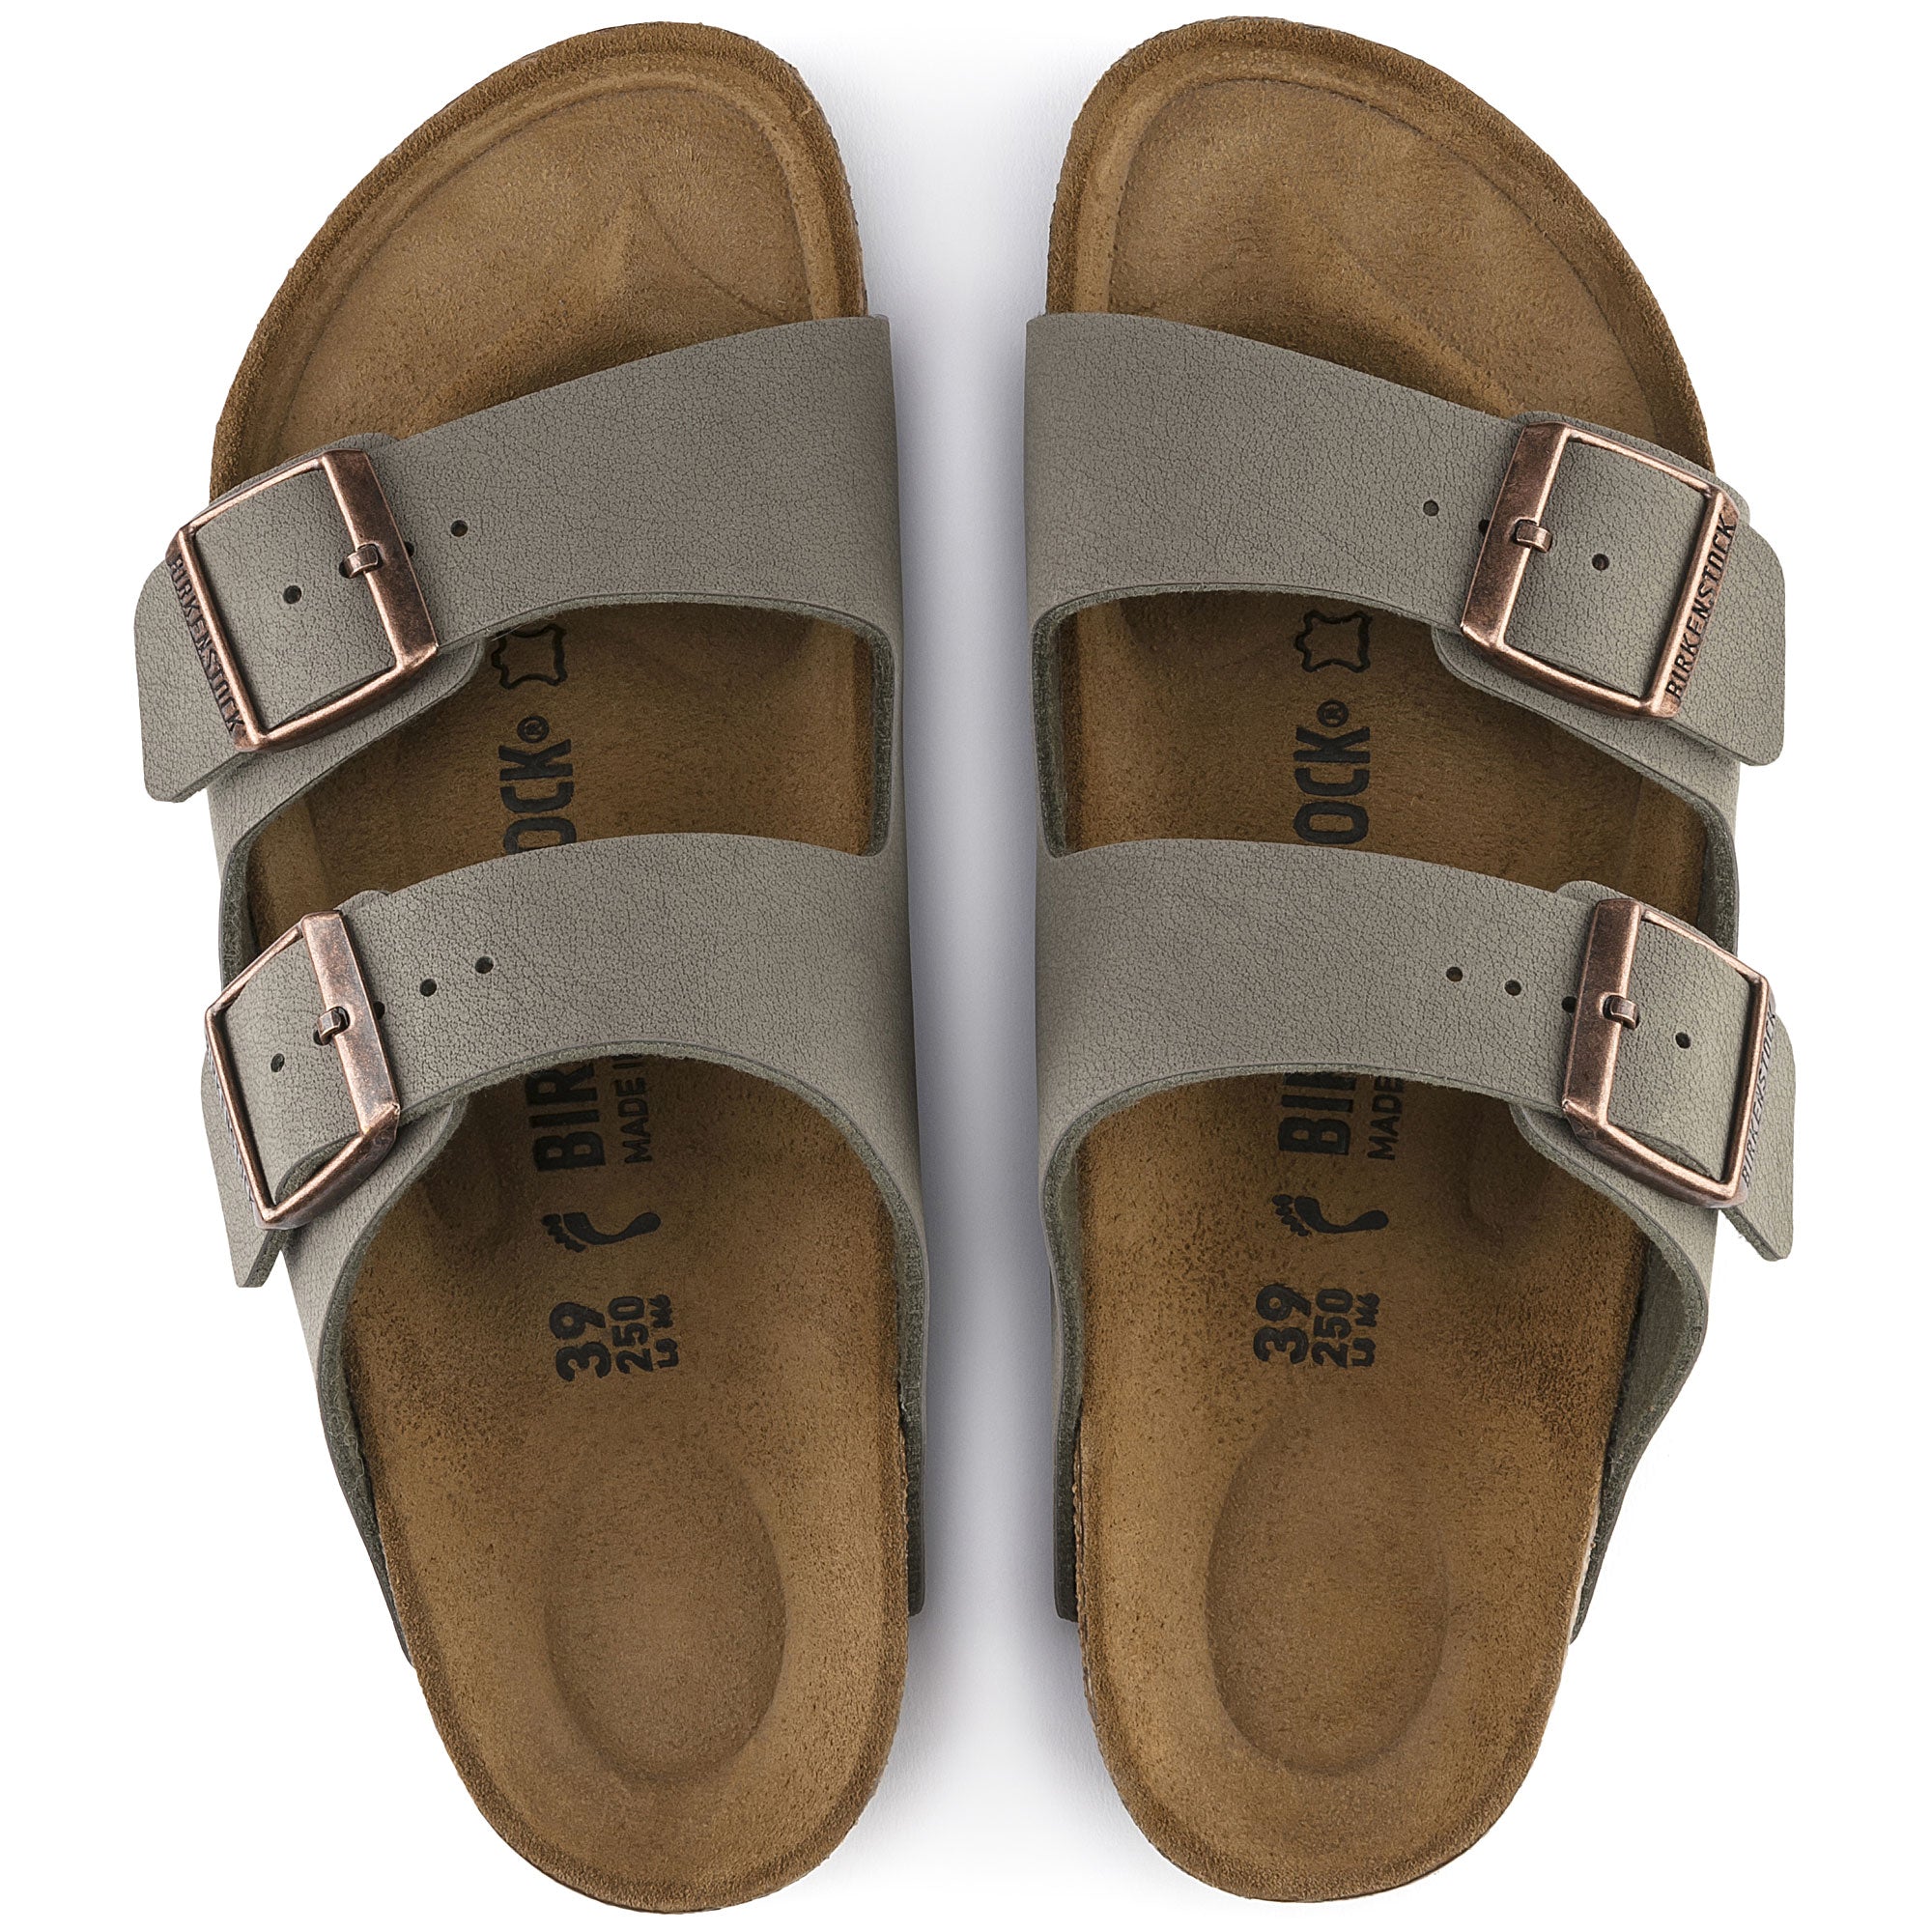 Arizona BirkiBuc in Stone (Classic Footbed - Suede Lined) - Milu James St